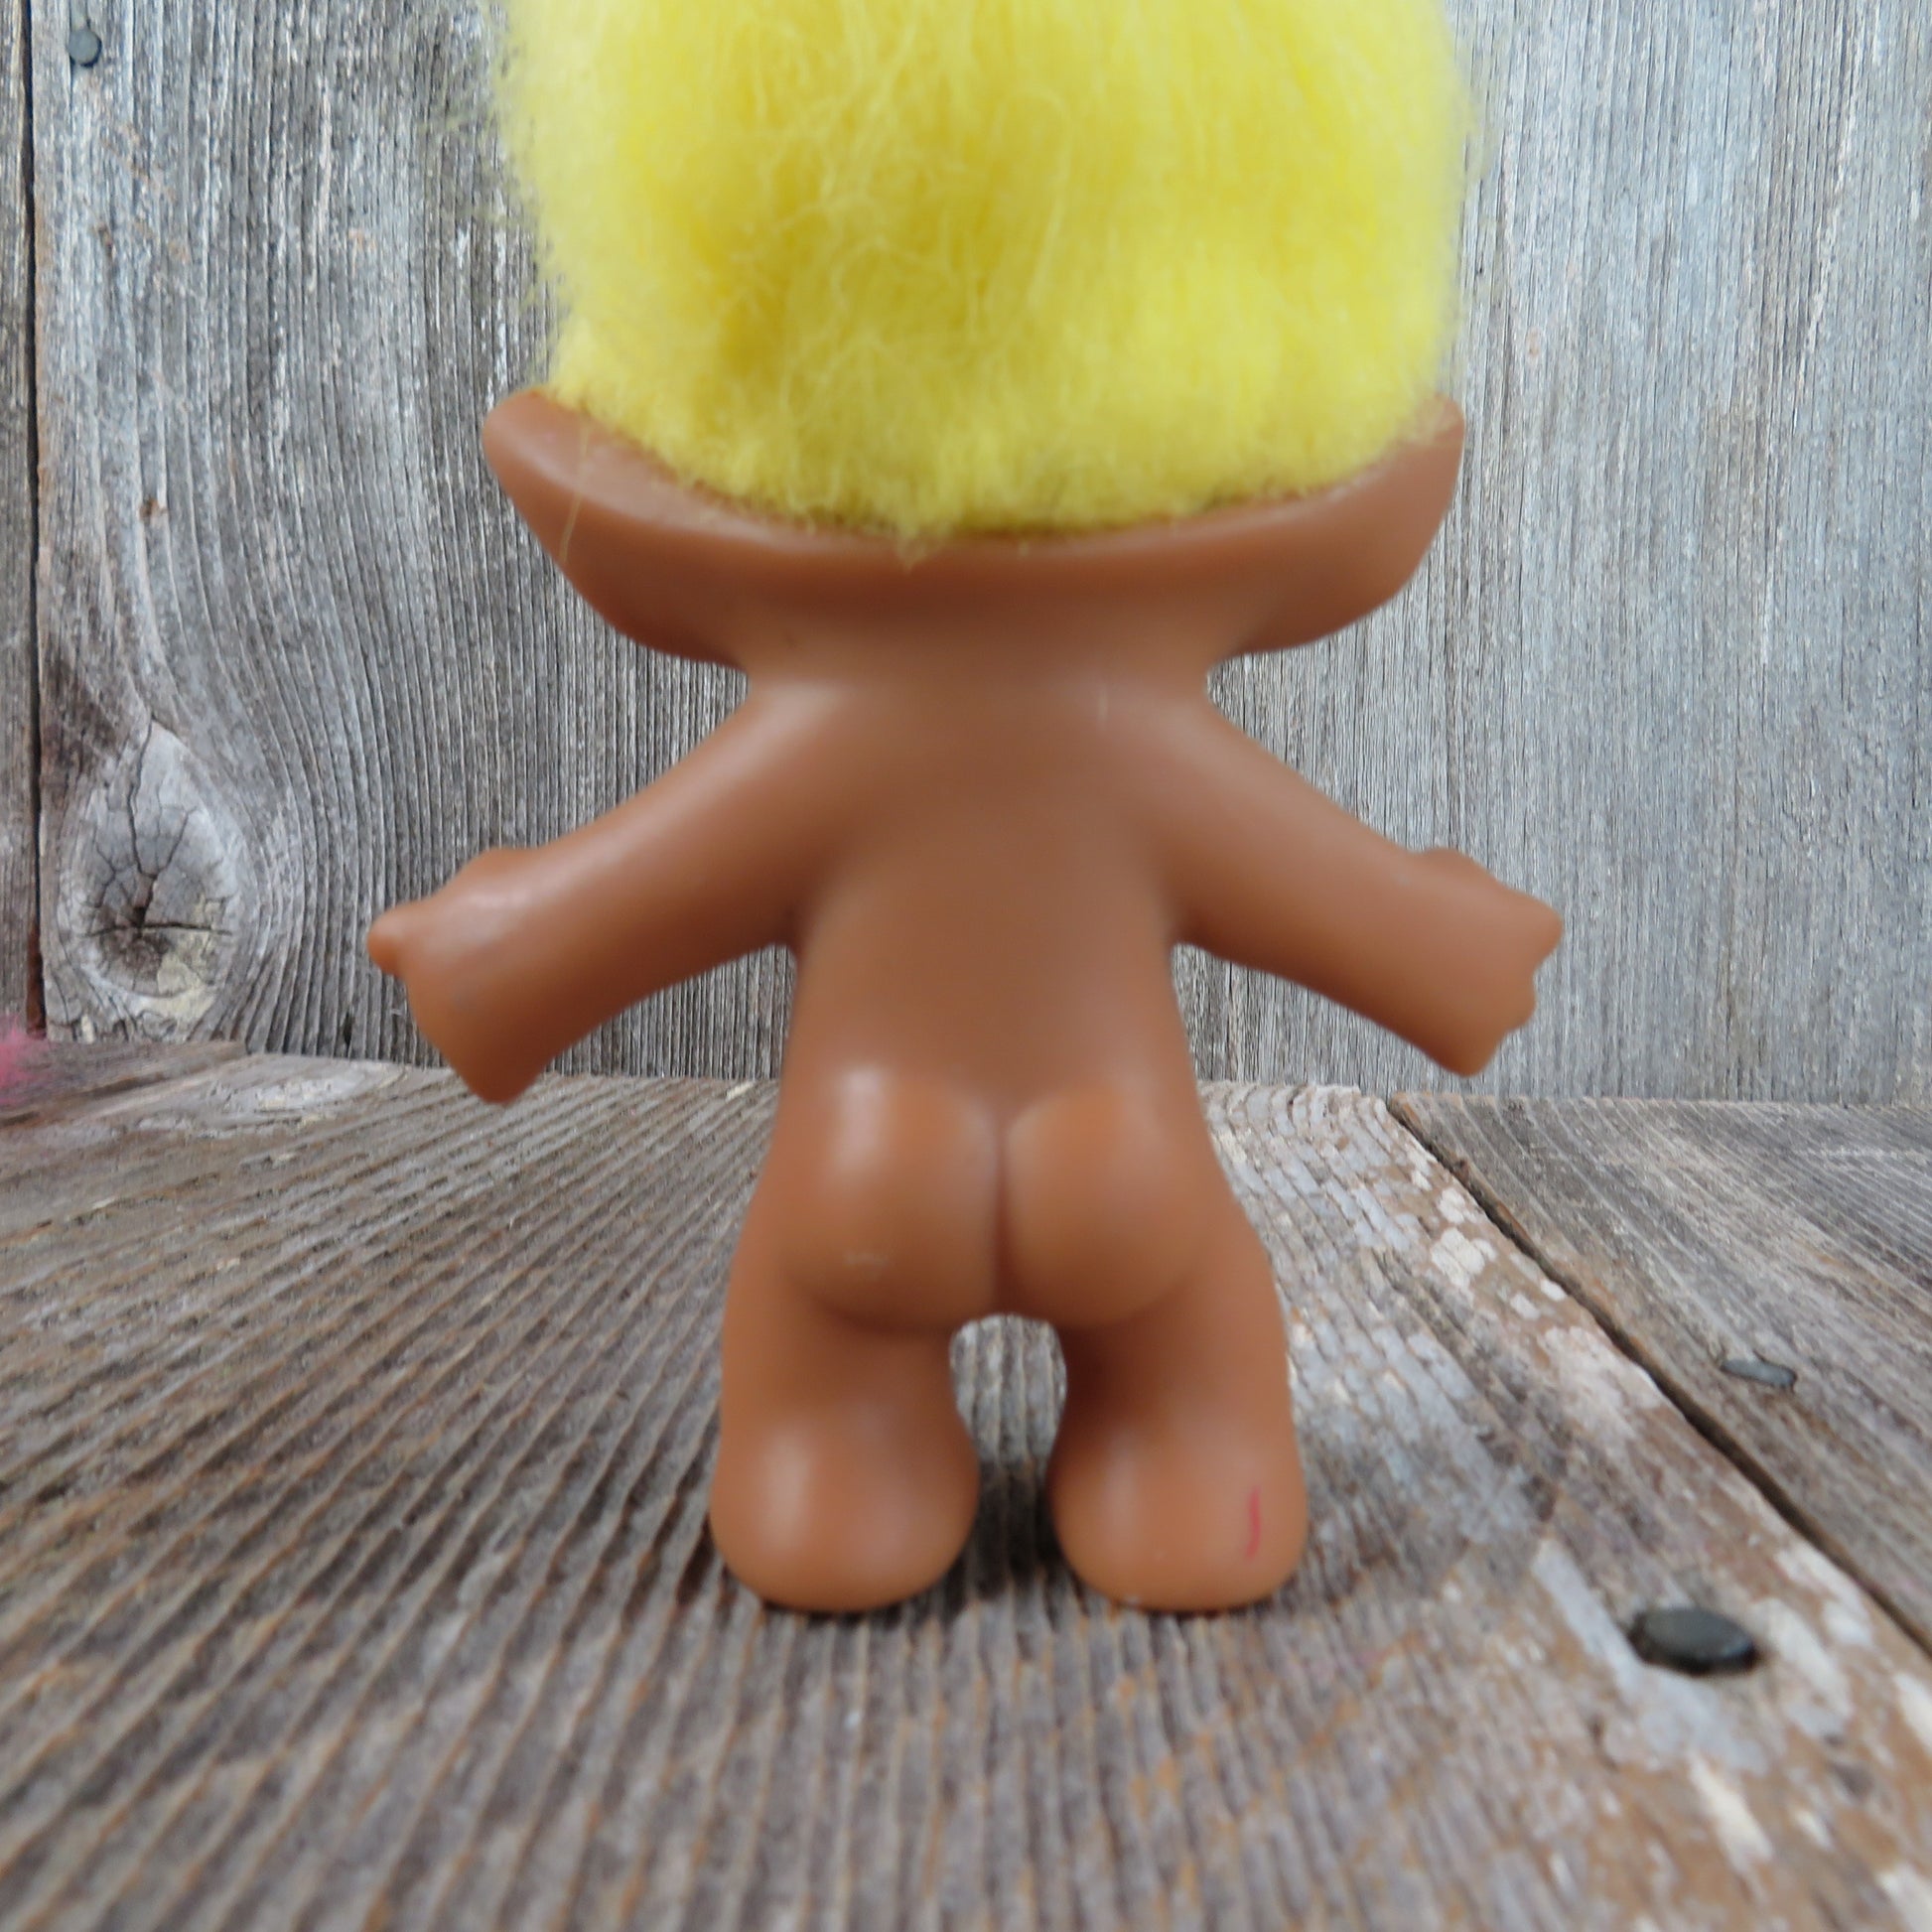 Vintage Troll Doll Yellow Hair and Jewel Belly Button Green Eyes Ace Novelty - At Grandma's Table